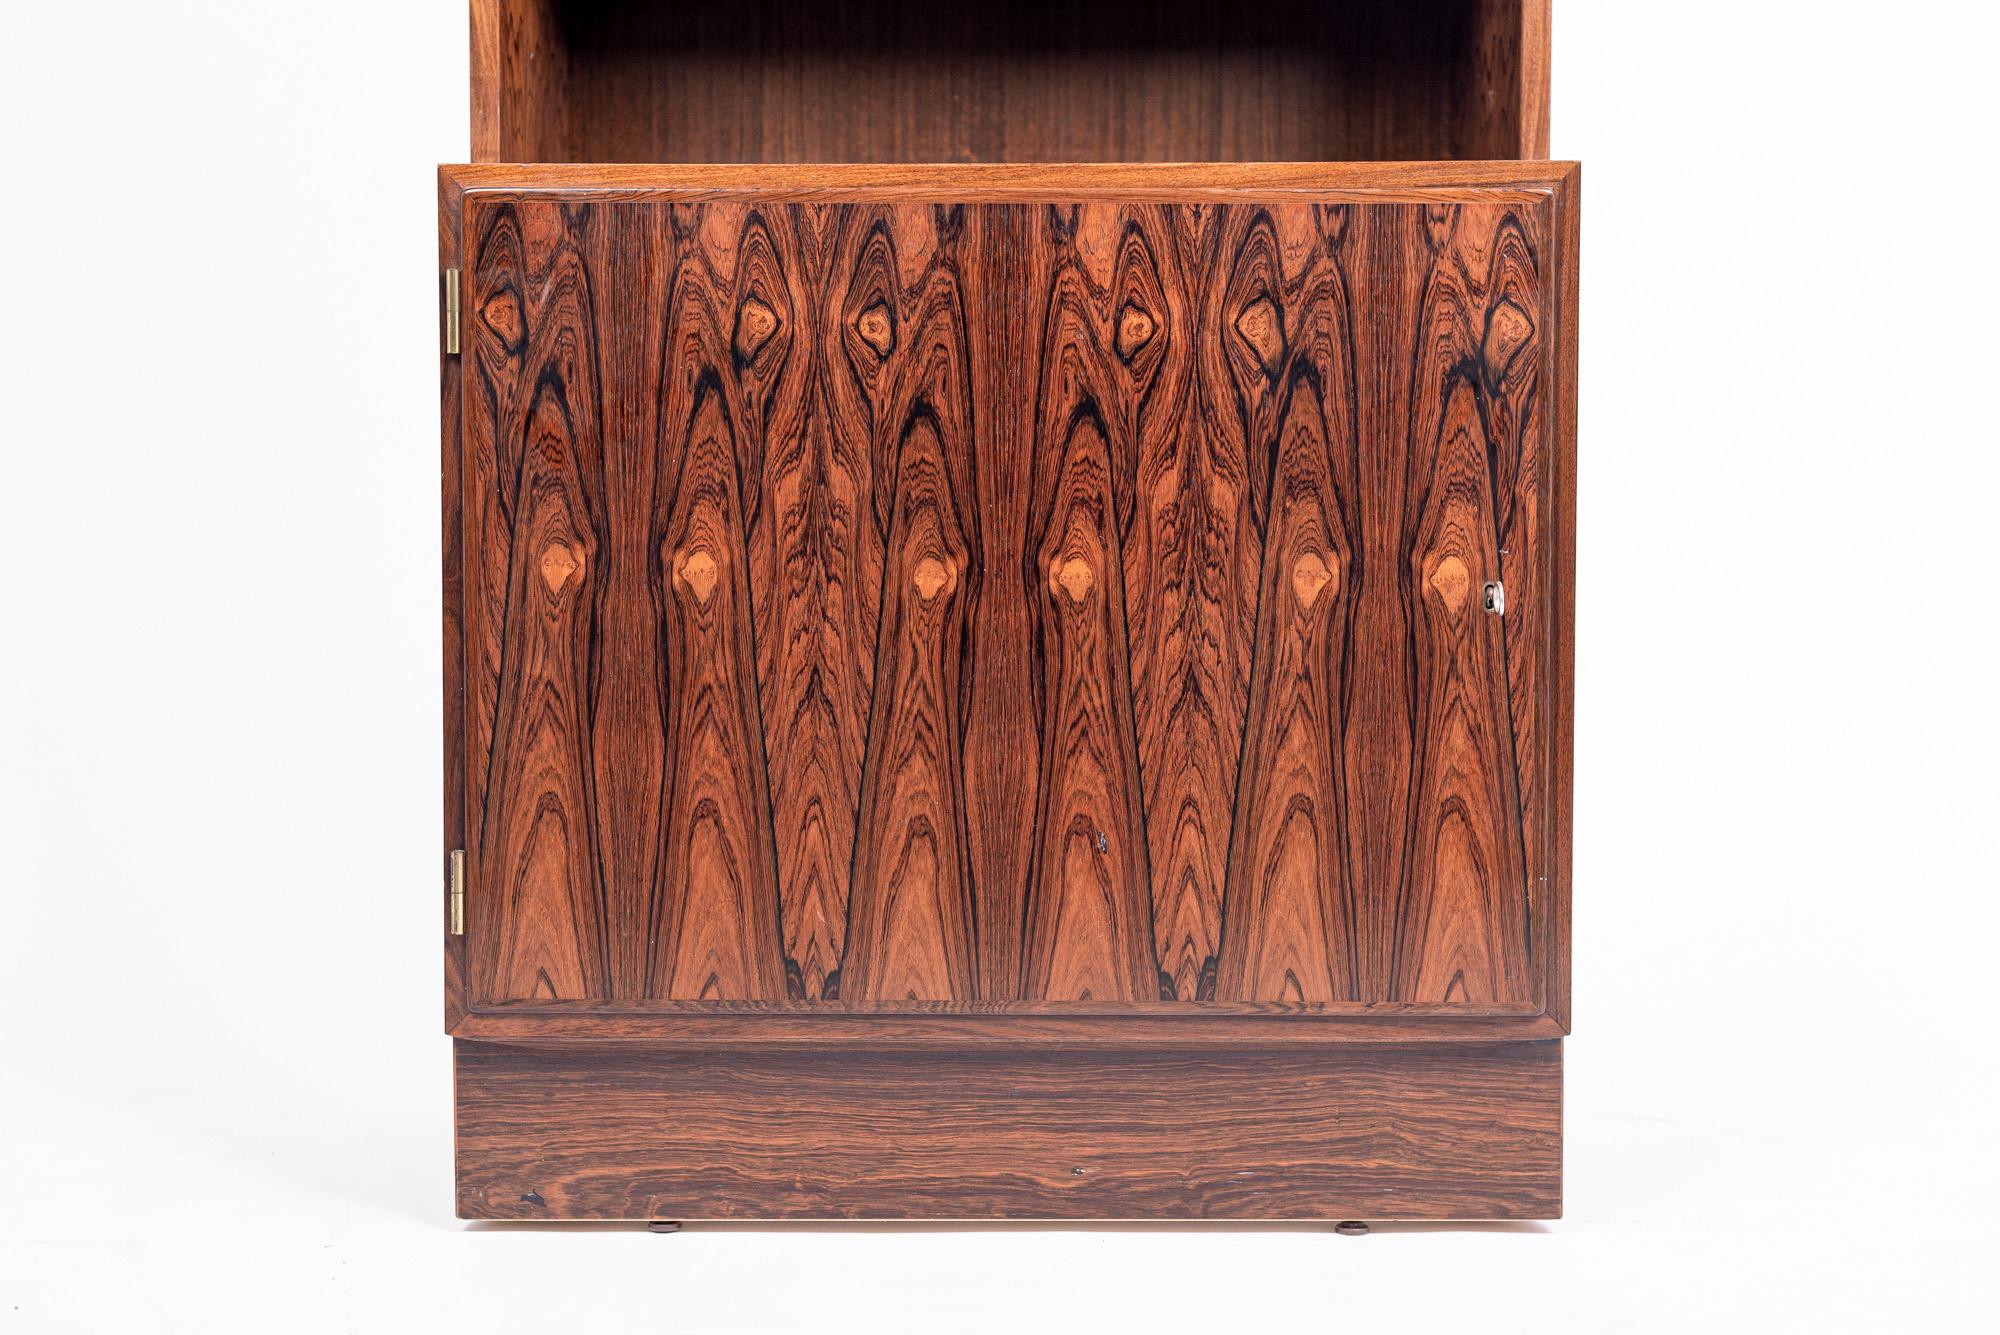 Midcentury Danish Bookshelf Cabinet in Rosewood by Carlo Jensen for Hundevad In Good Condition For Sale In Detroit, MI